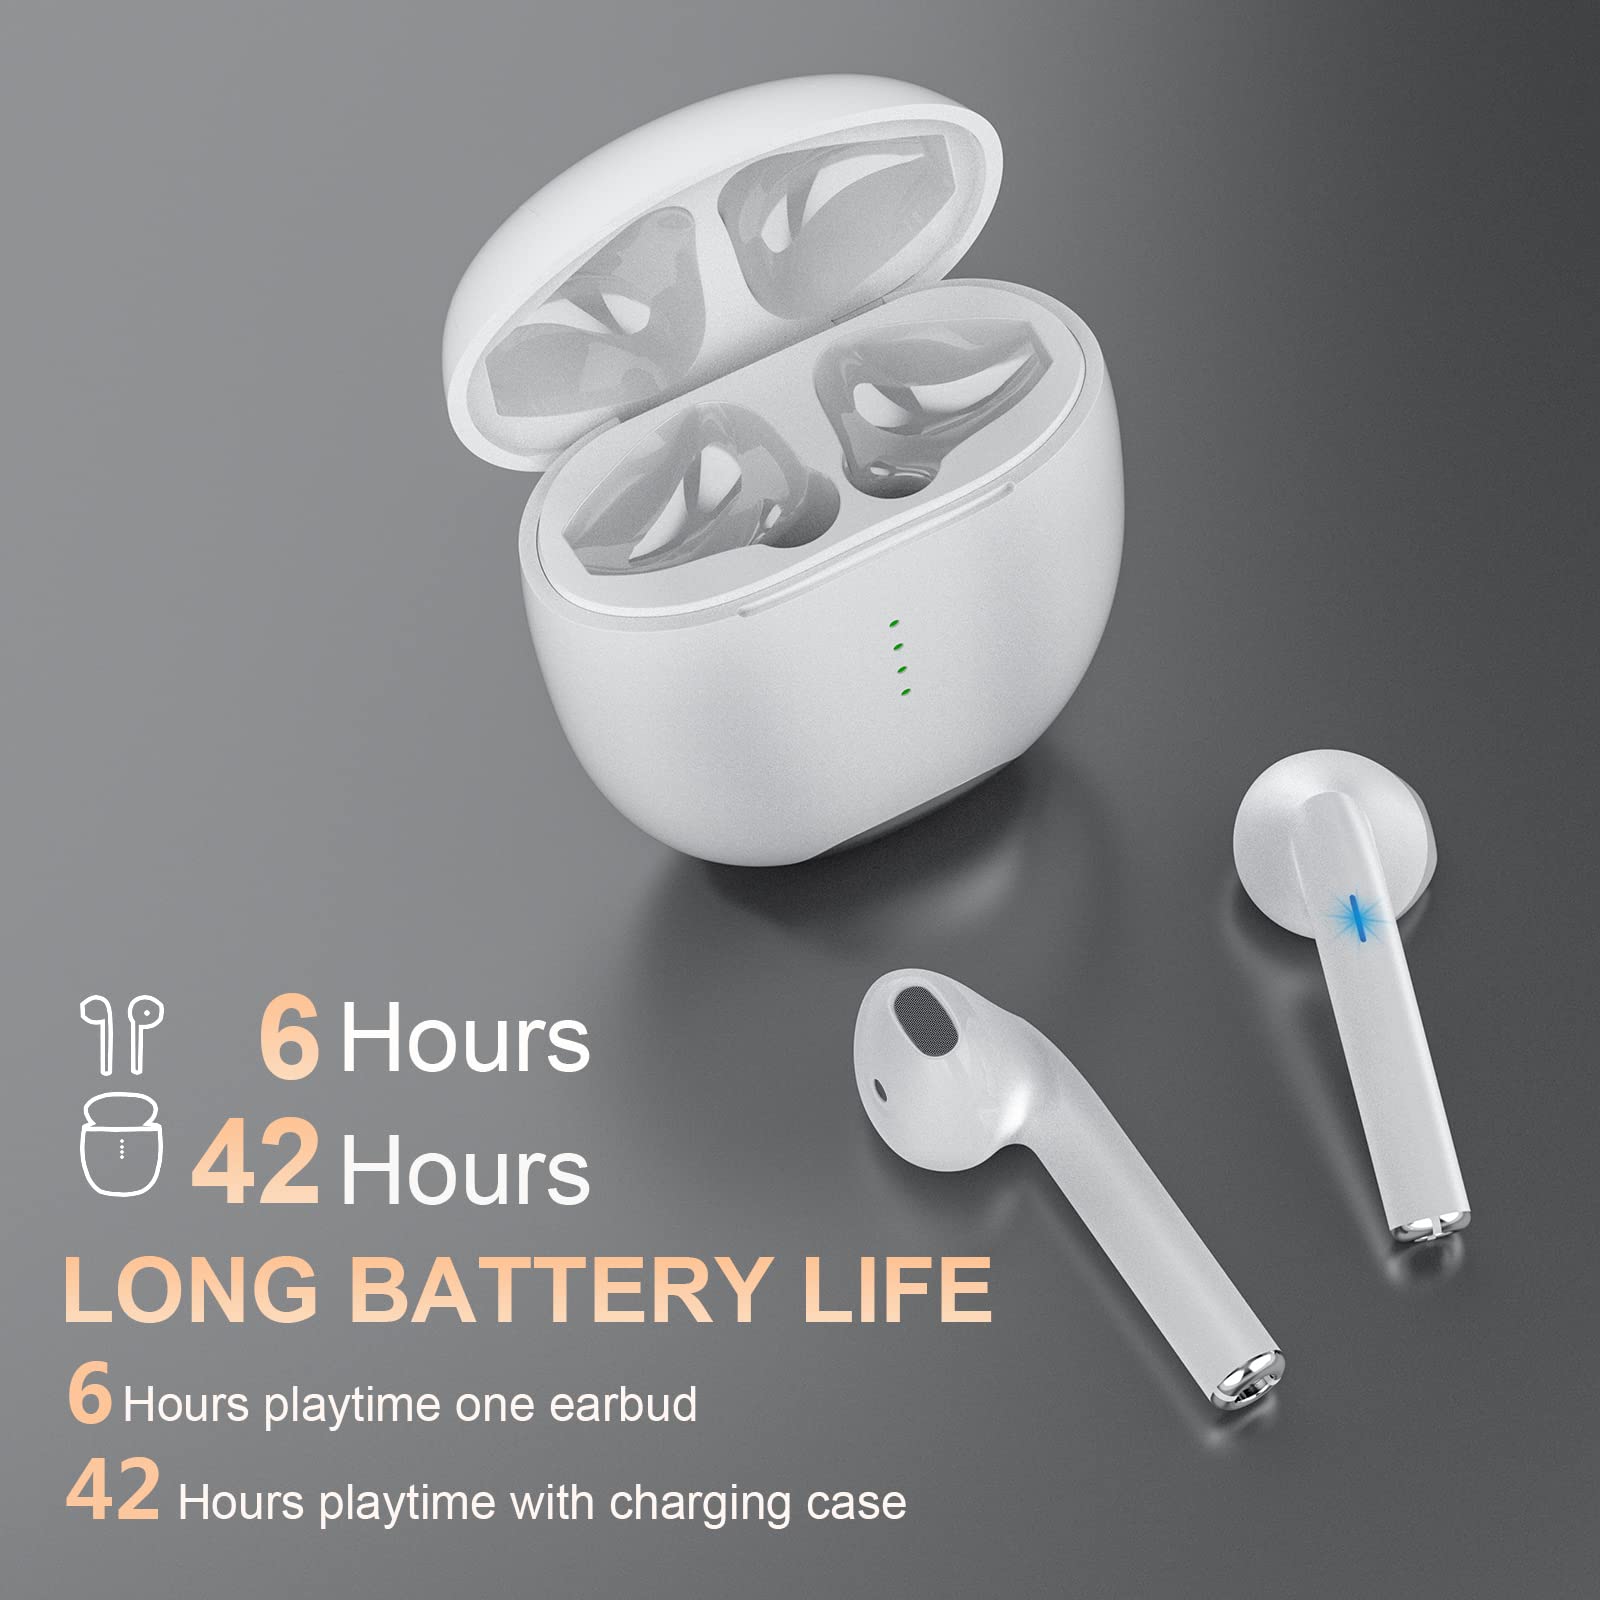 Wireless Earbuds Bluetooth 5.3 Headphones HI-FI Stereo, Wireless Earphones 42H Playtime Fast Charging,In Ear Headphones with CVC 8.0 Noise Reduction Touch Control Ear buds for Samsung iPhone Android